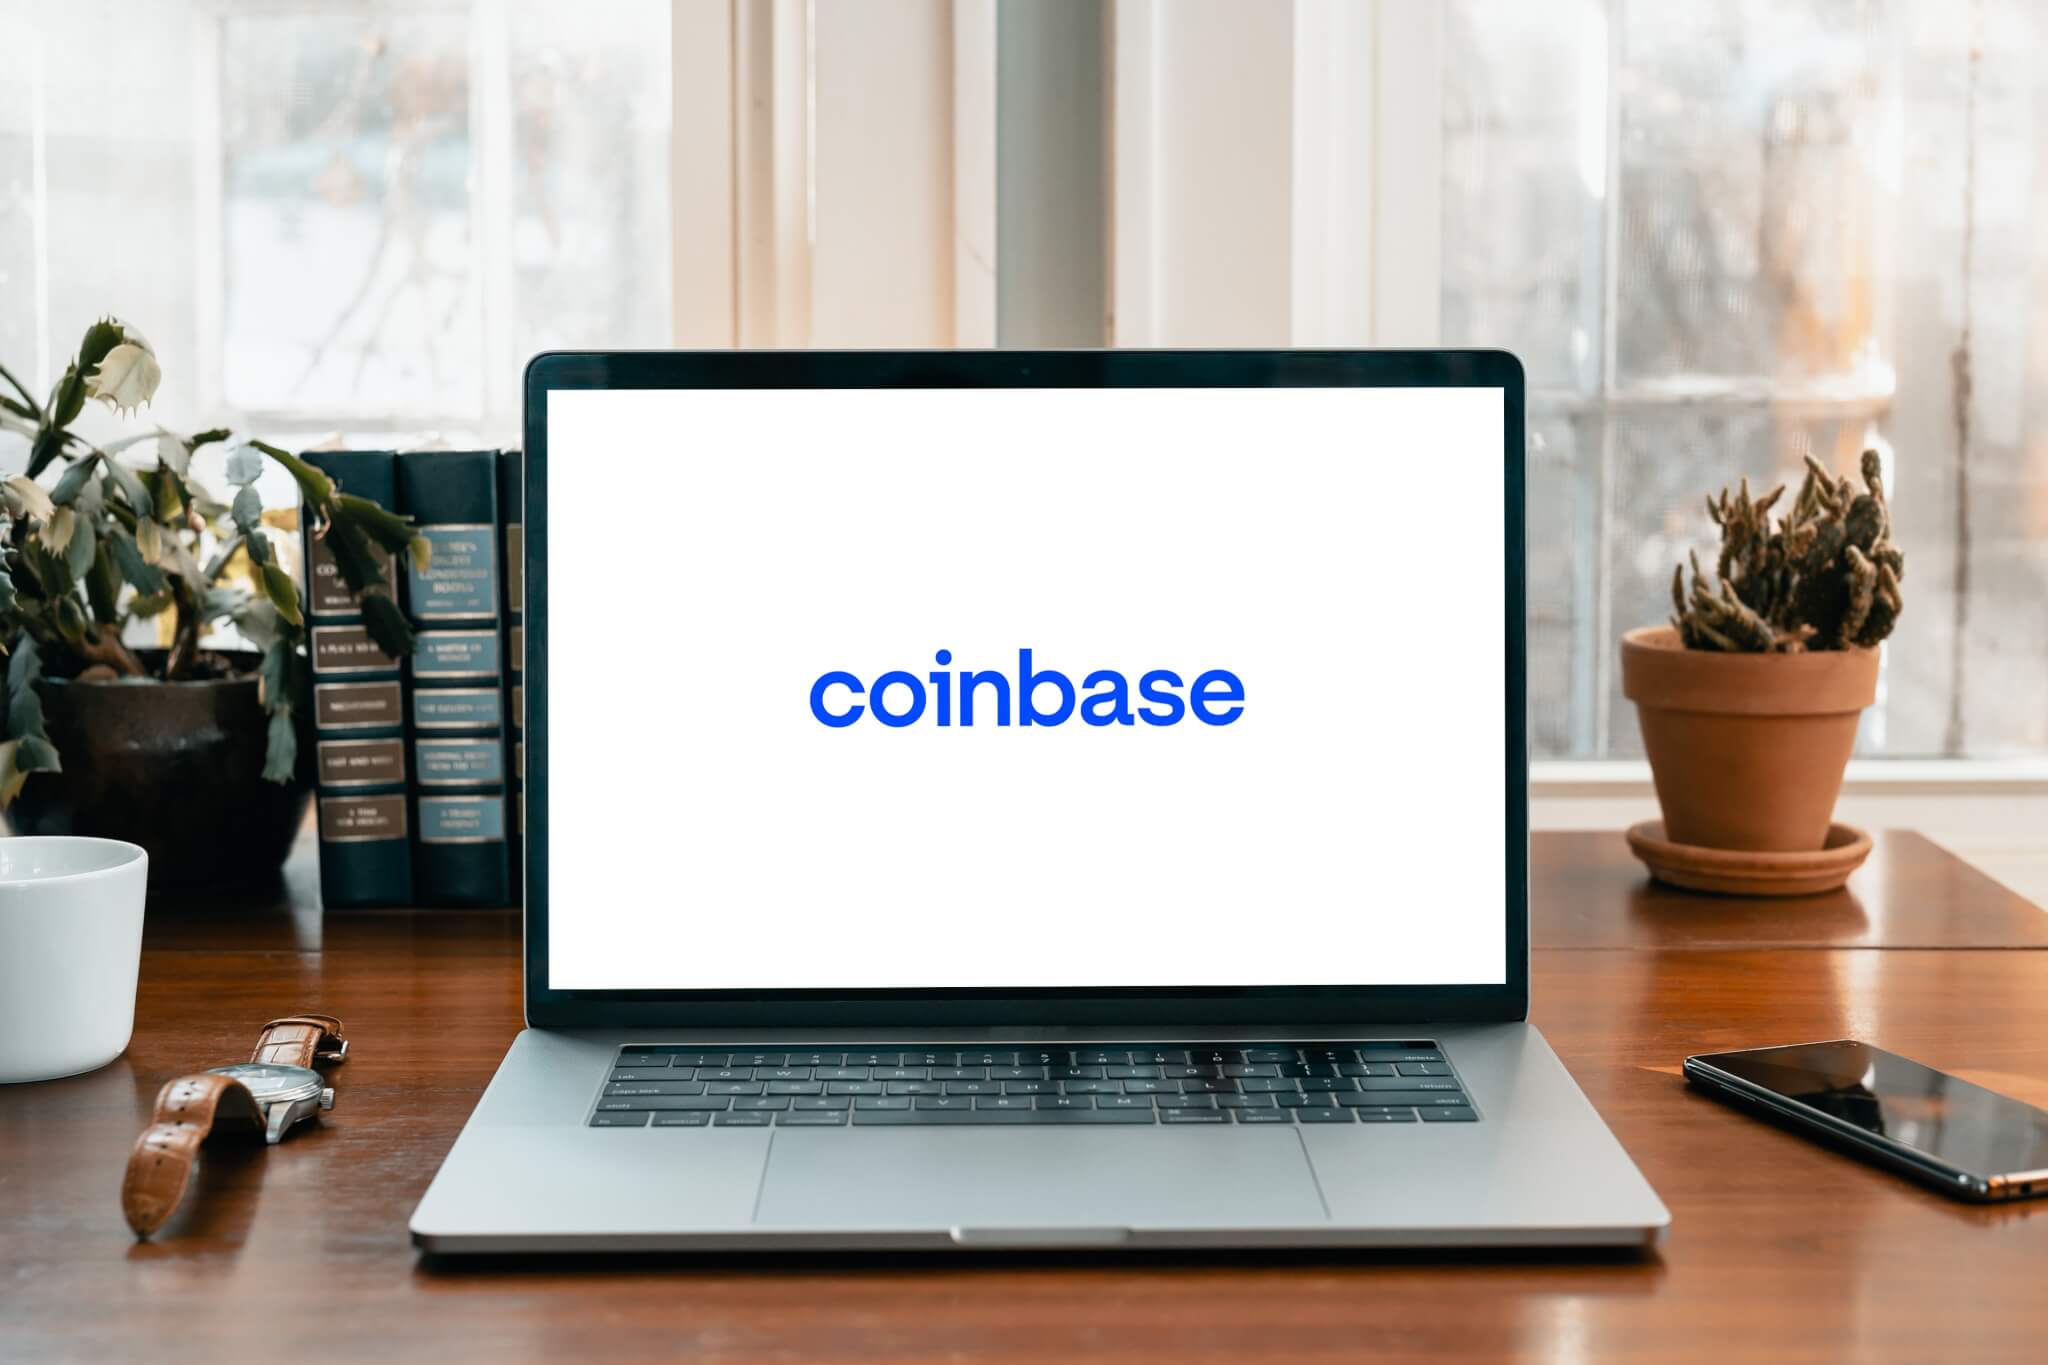 coinbase stock outlook analyst upside $75